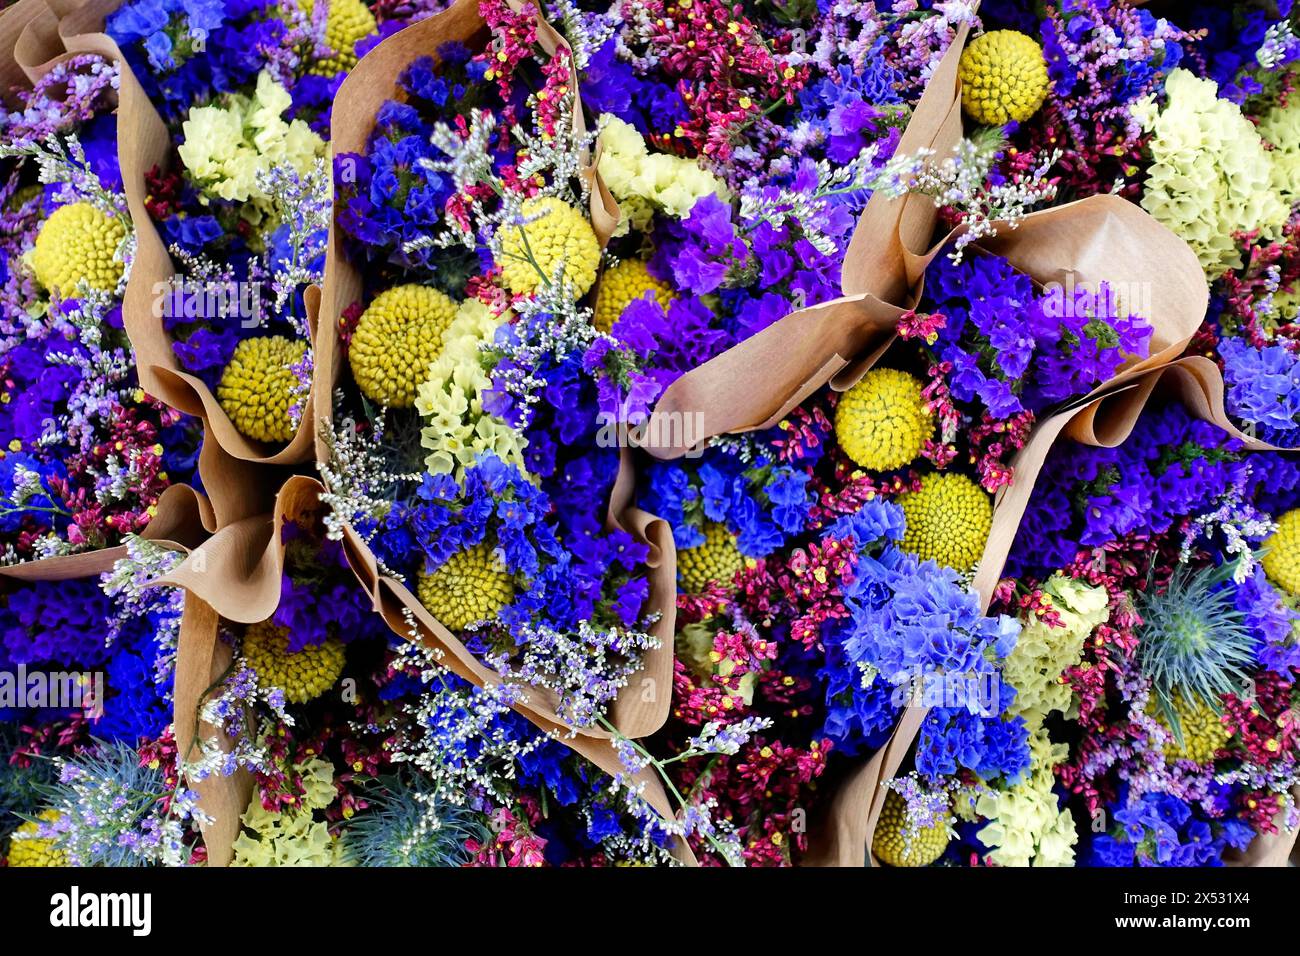 Several bundled flower arrangements in vivid shades of purple and yellow, flower sale, Central Station, Hamburg, Hanseatic City of Hamburg, Germany Stock Photo